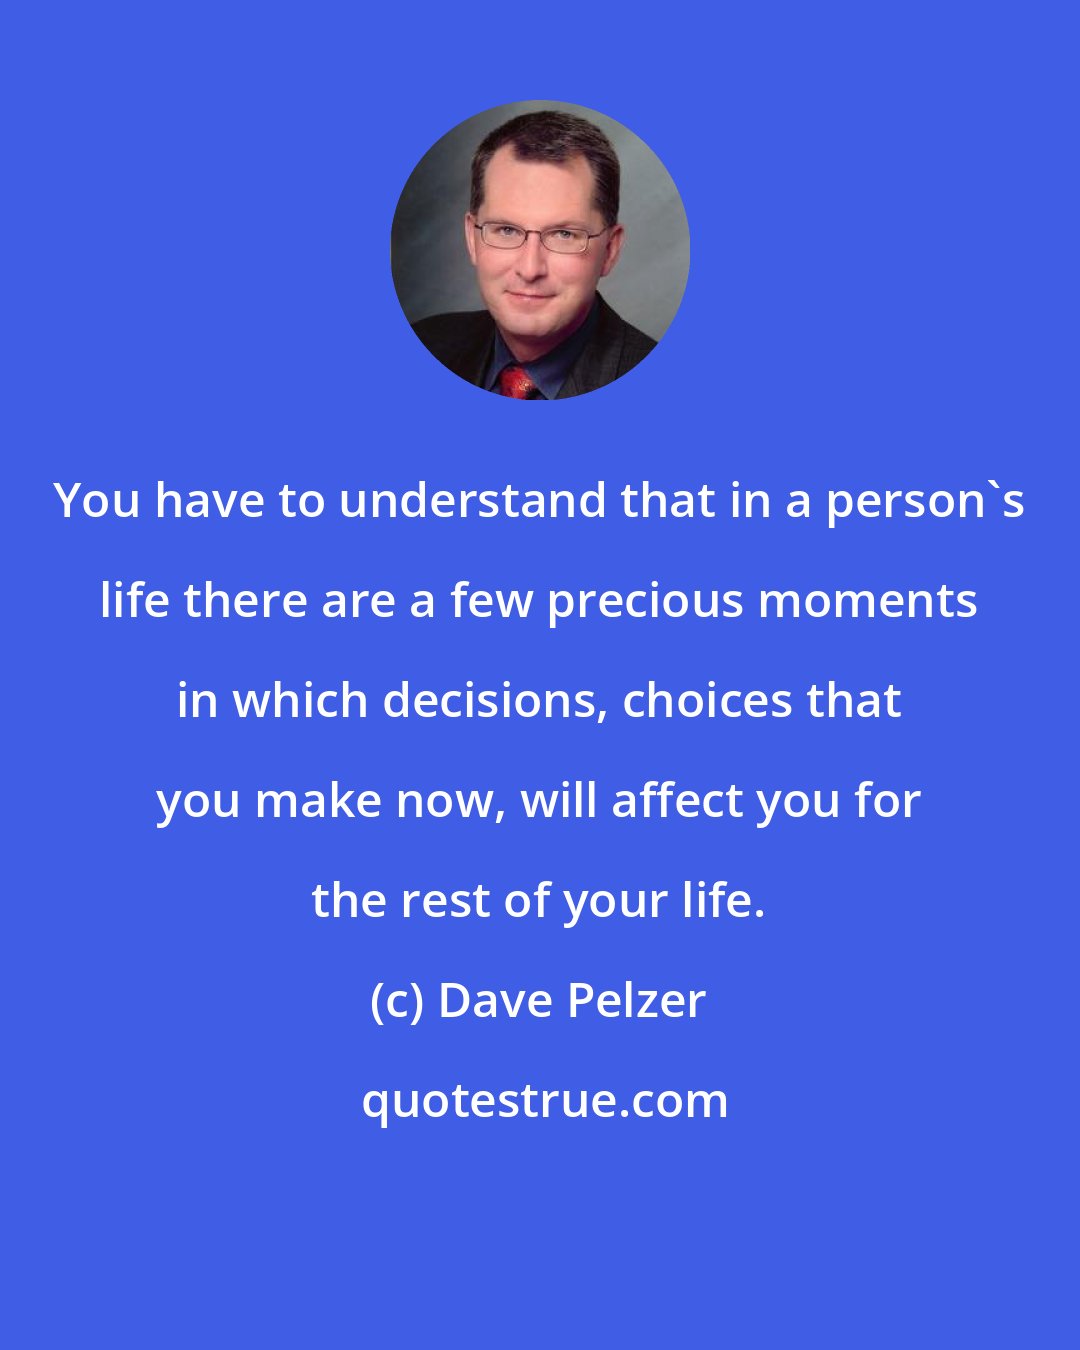 Dave Pelzer: You have to understand that in a person's life there are a few precious moments in which decisions, choices that you make now, will affect you for the rest of your life.